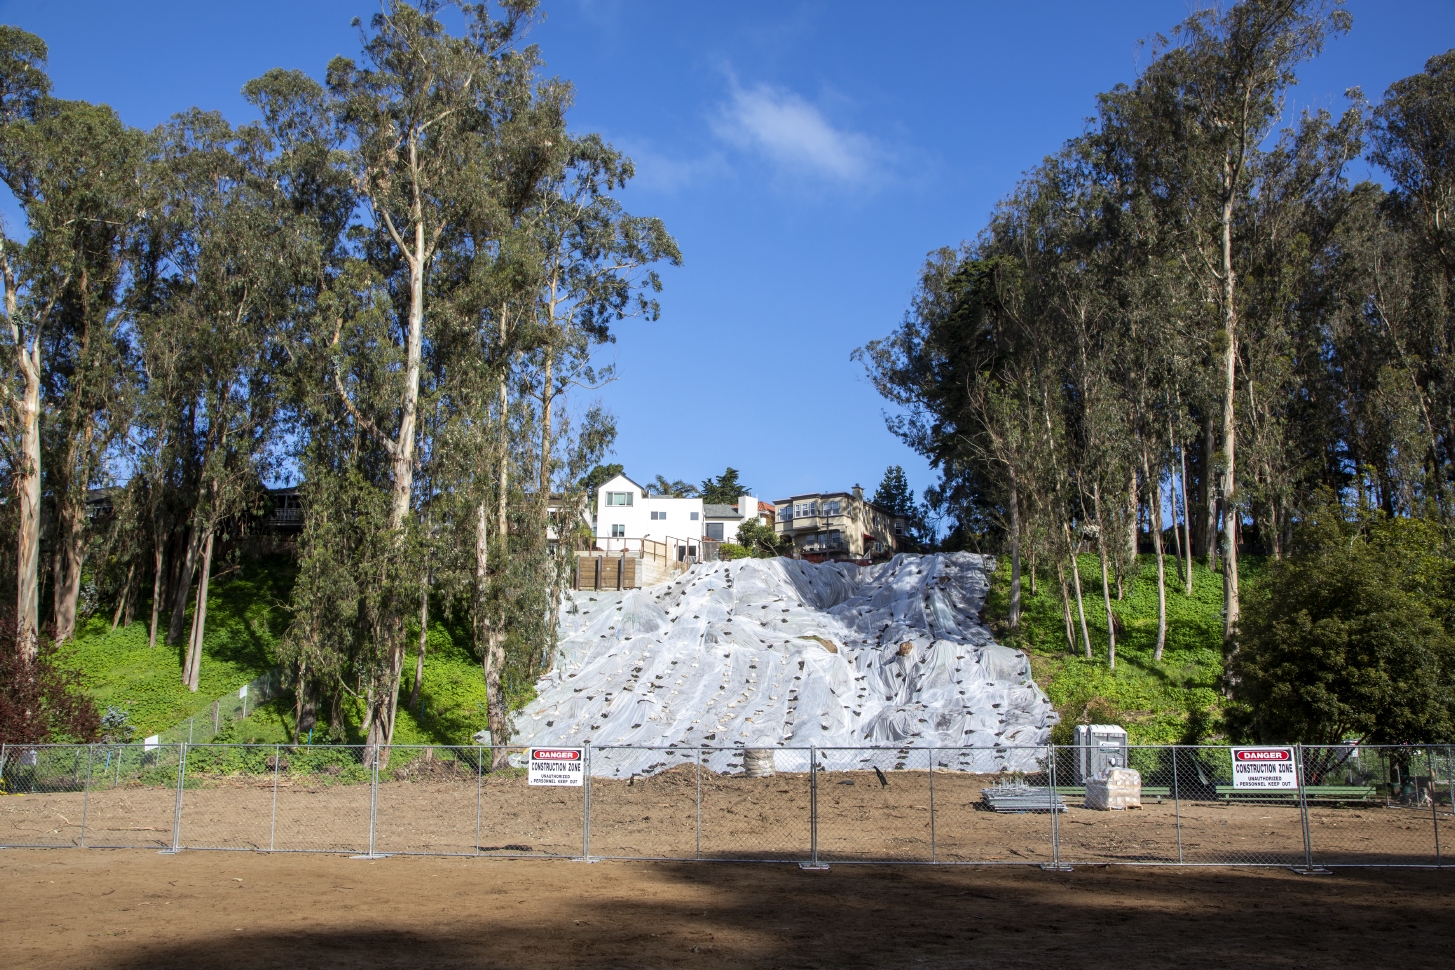 Image of Pine Lake Park slope covered with white plastic sheeting